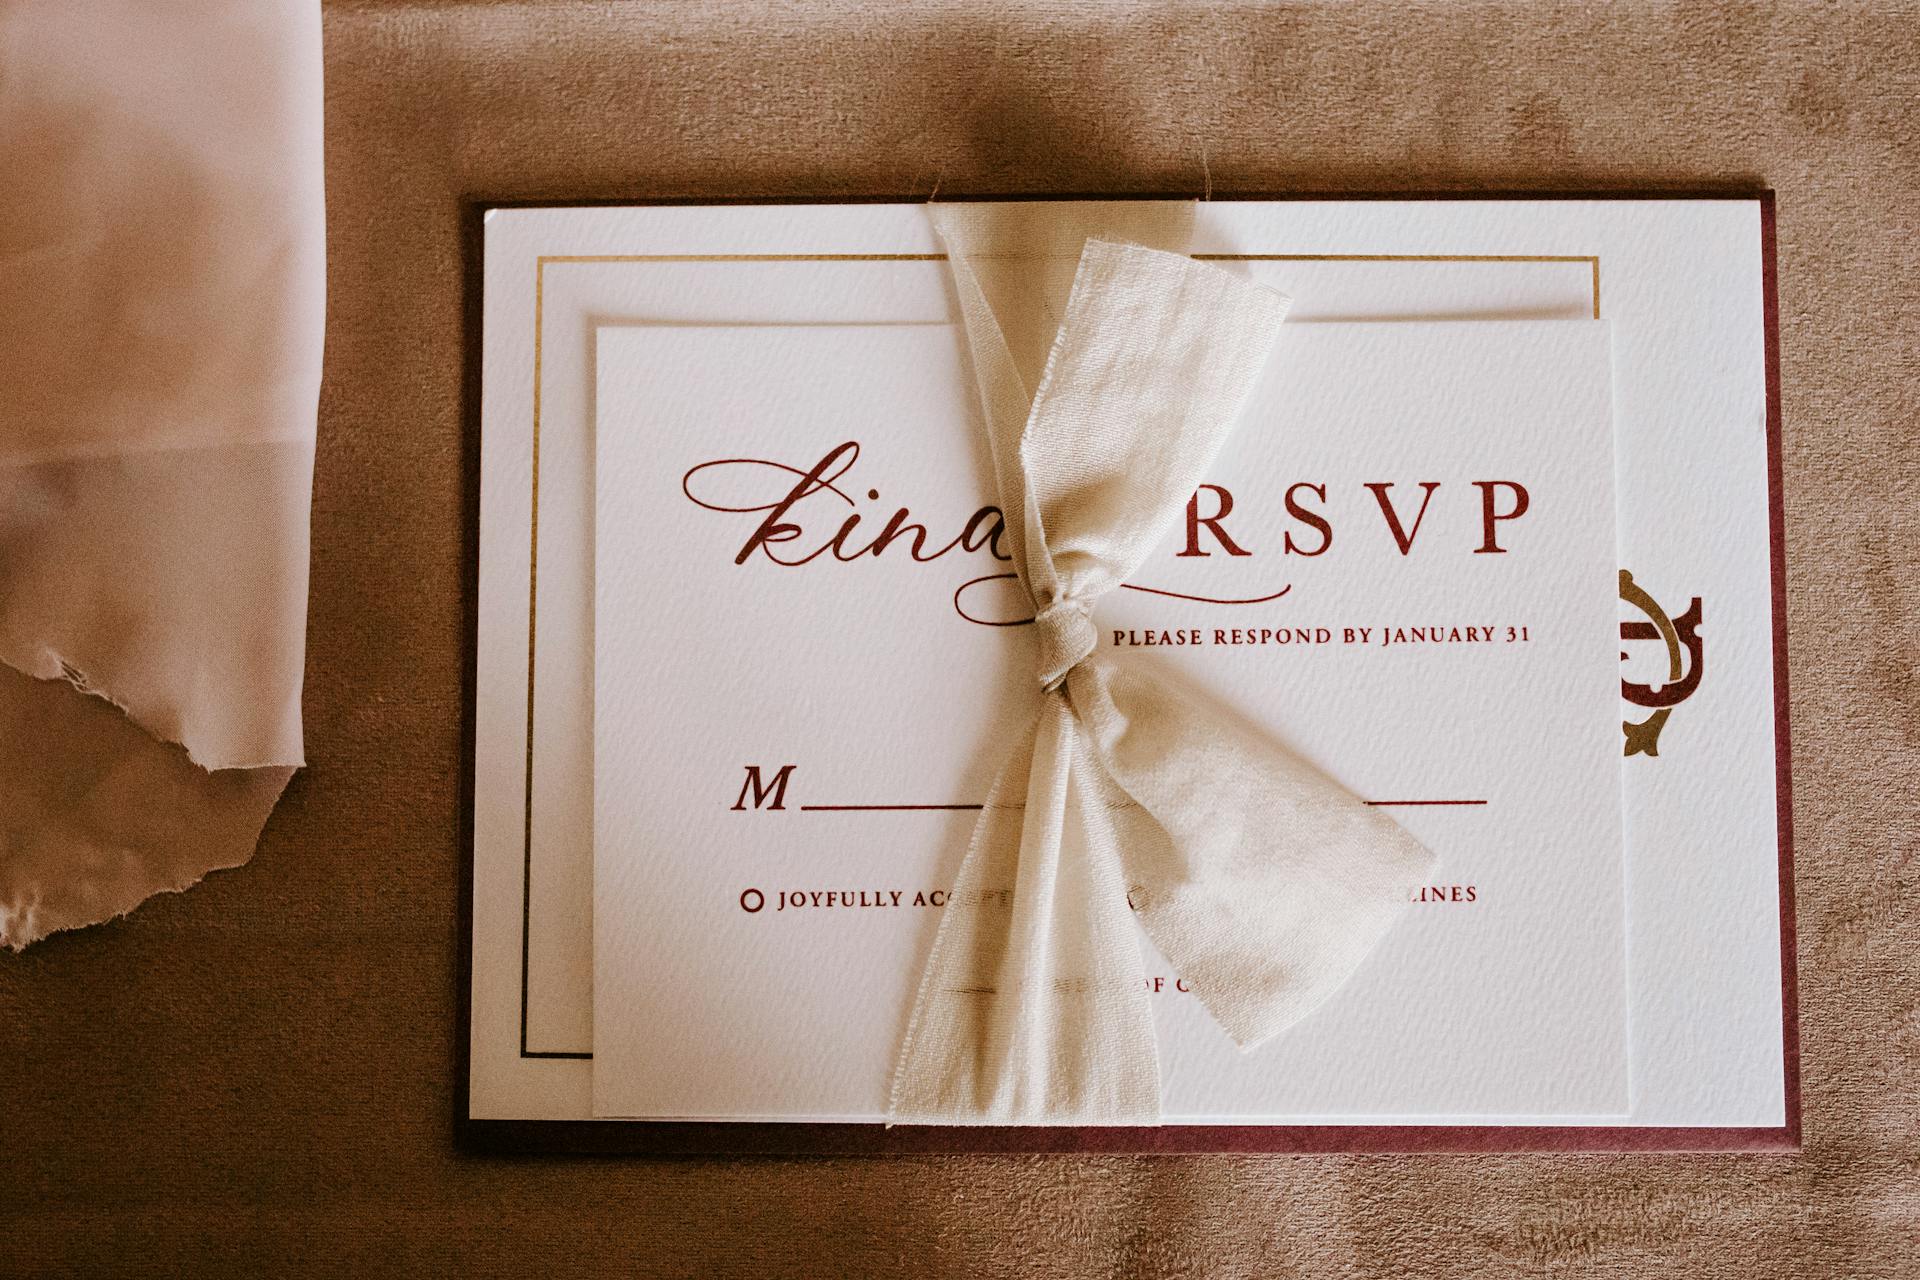 A wedding invitation and RSVP card | Source: Pexels